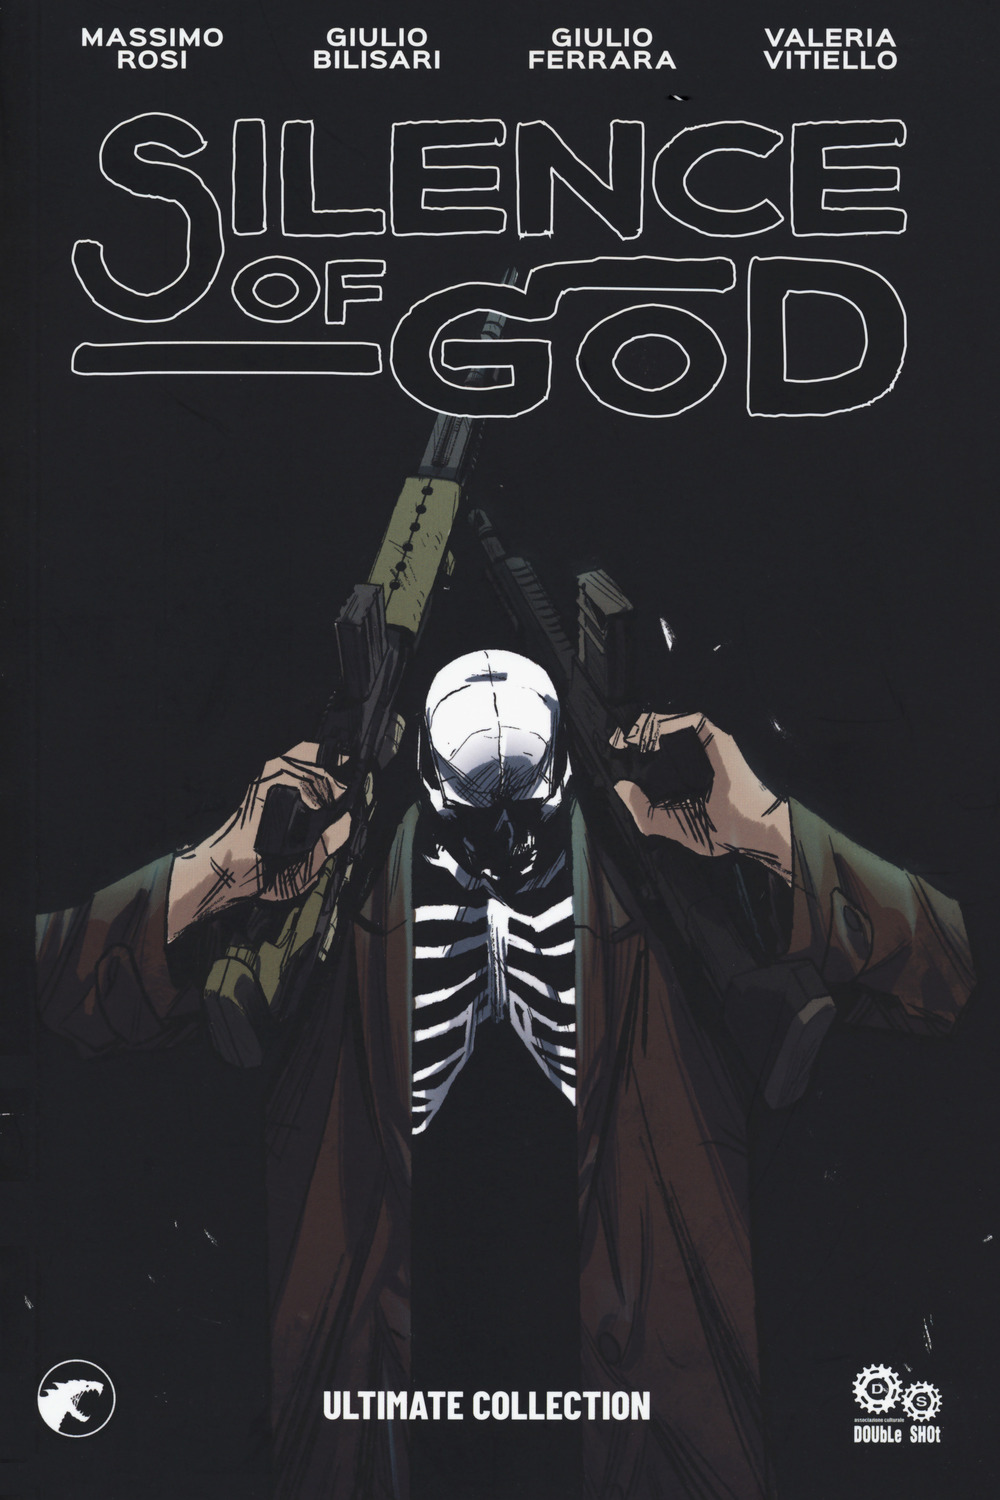 Silence of god. Ultimate collection